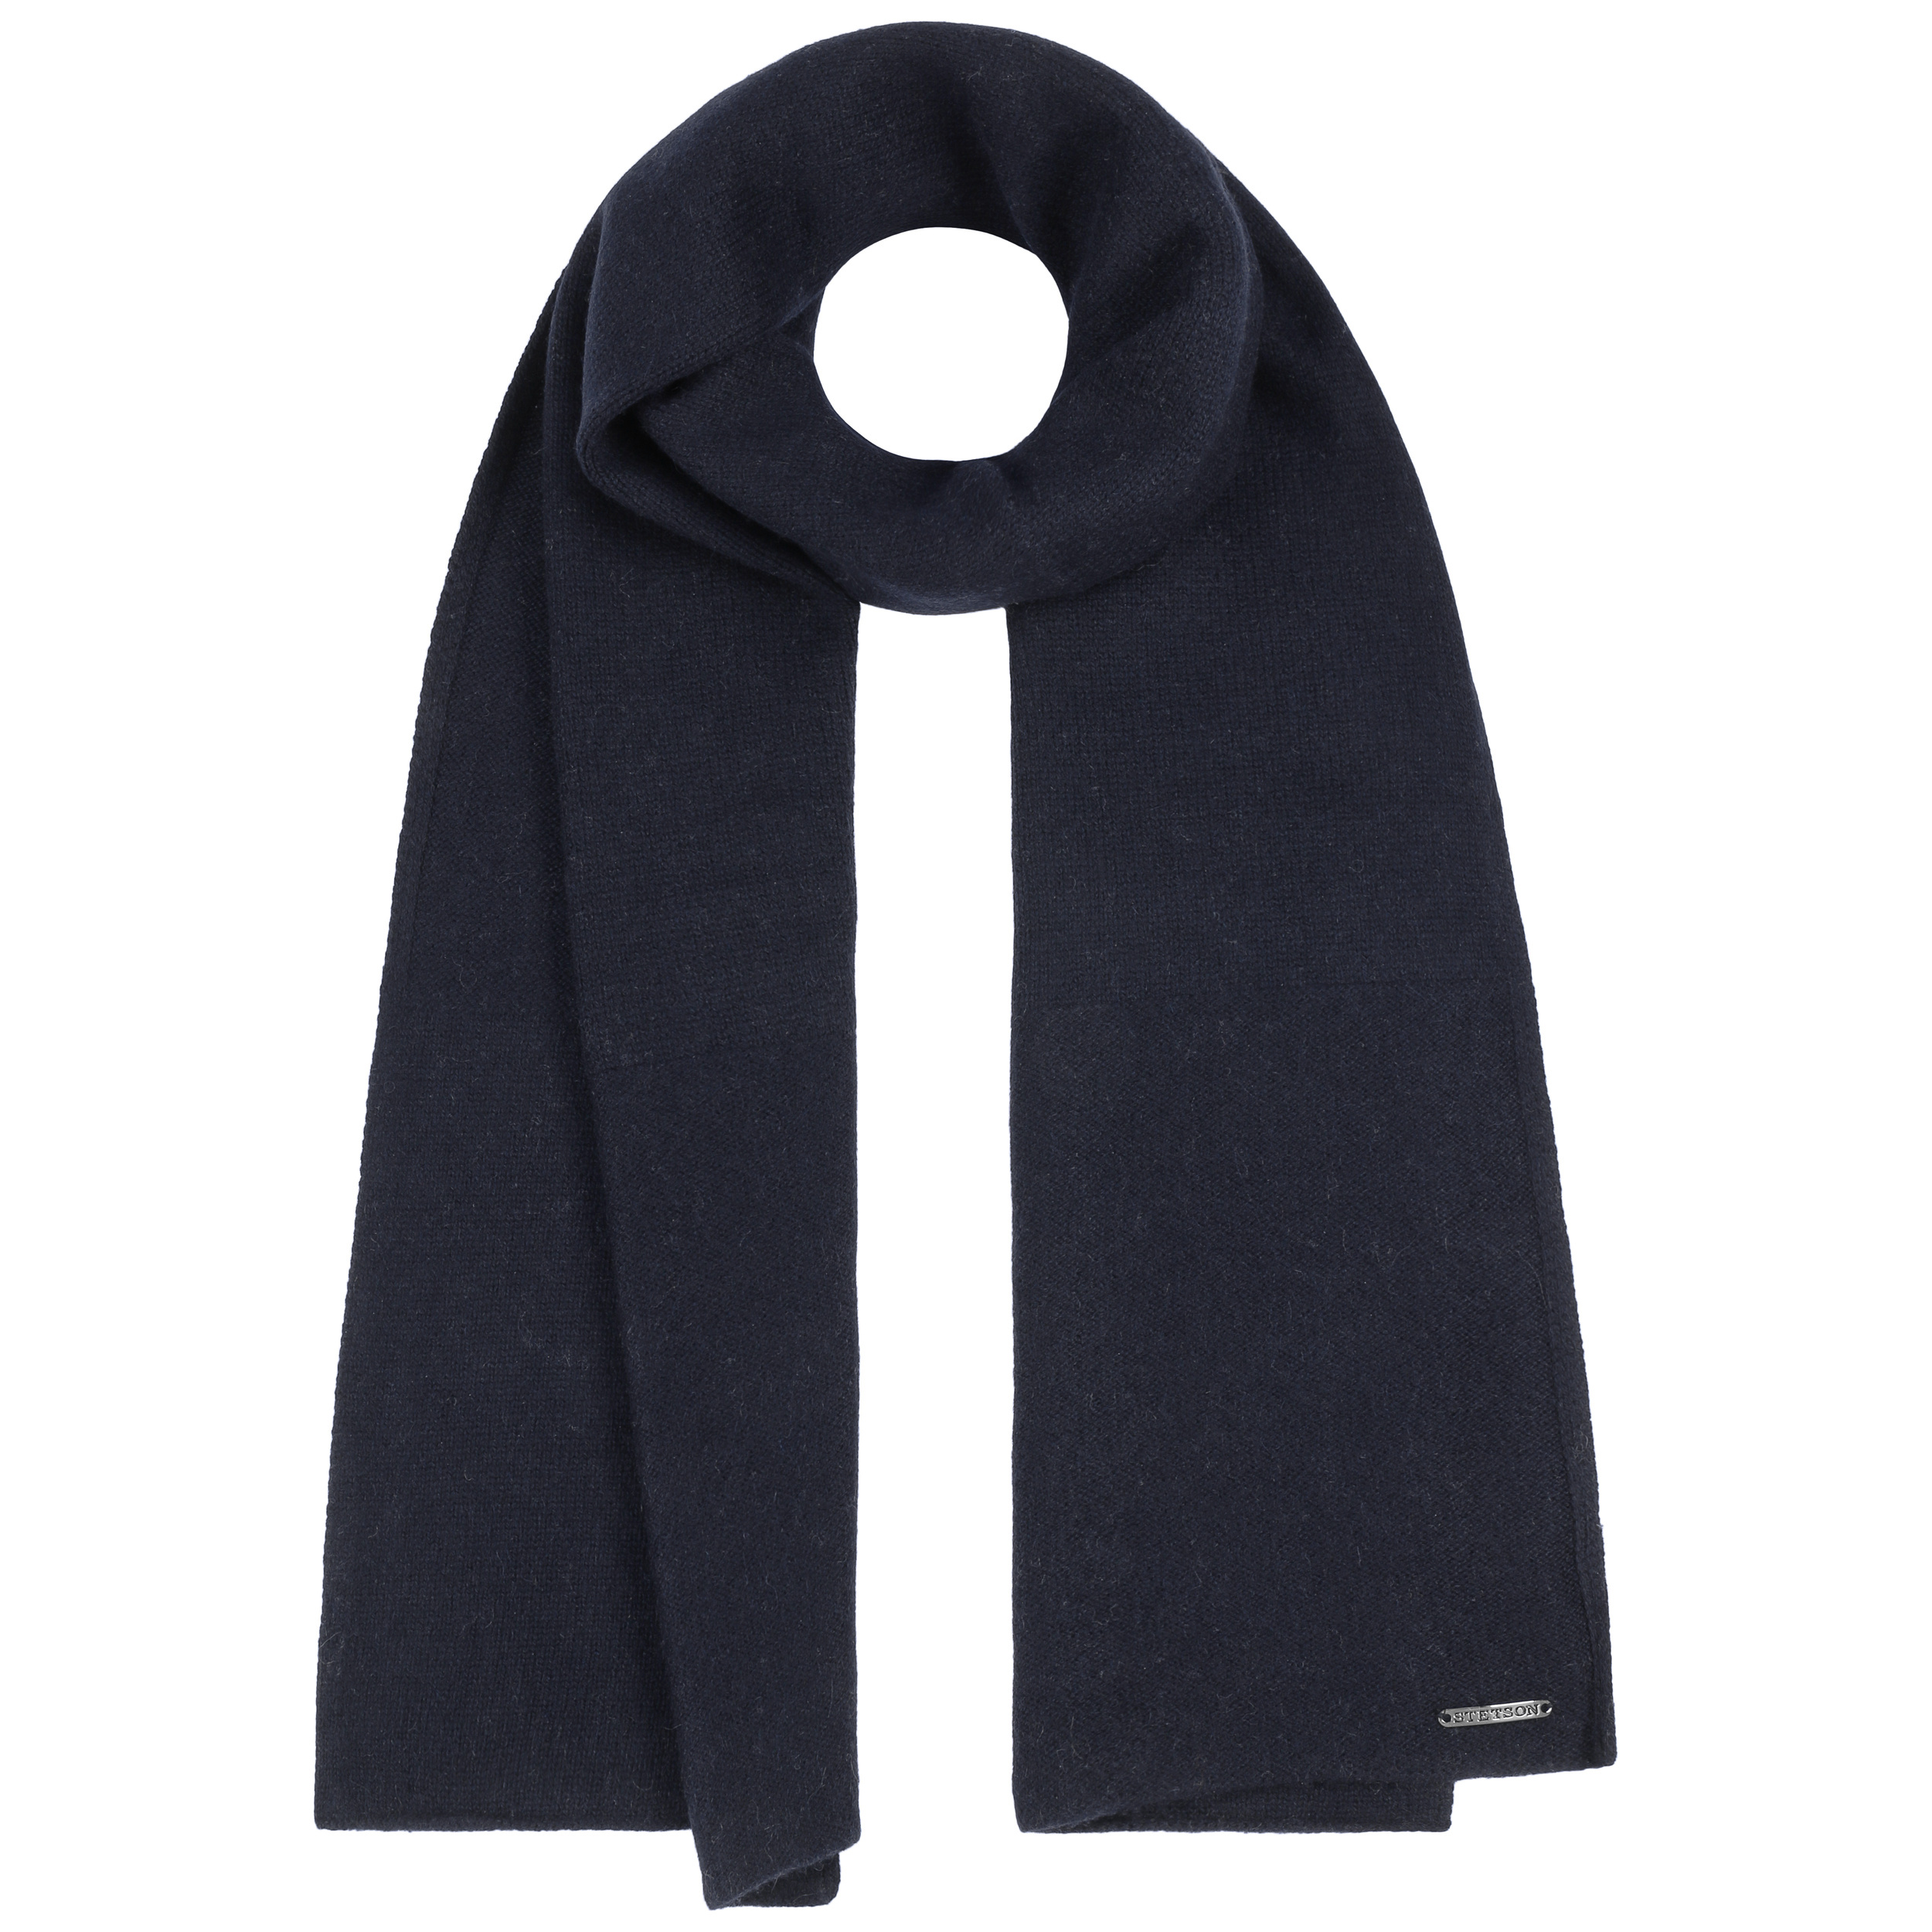 Cashmere Wool Knit Scarf - 169,00 by Stetson €